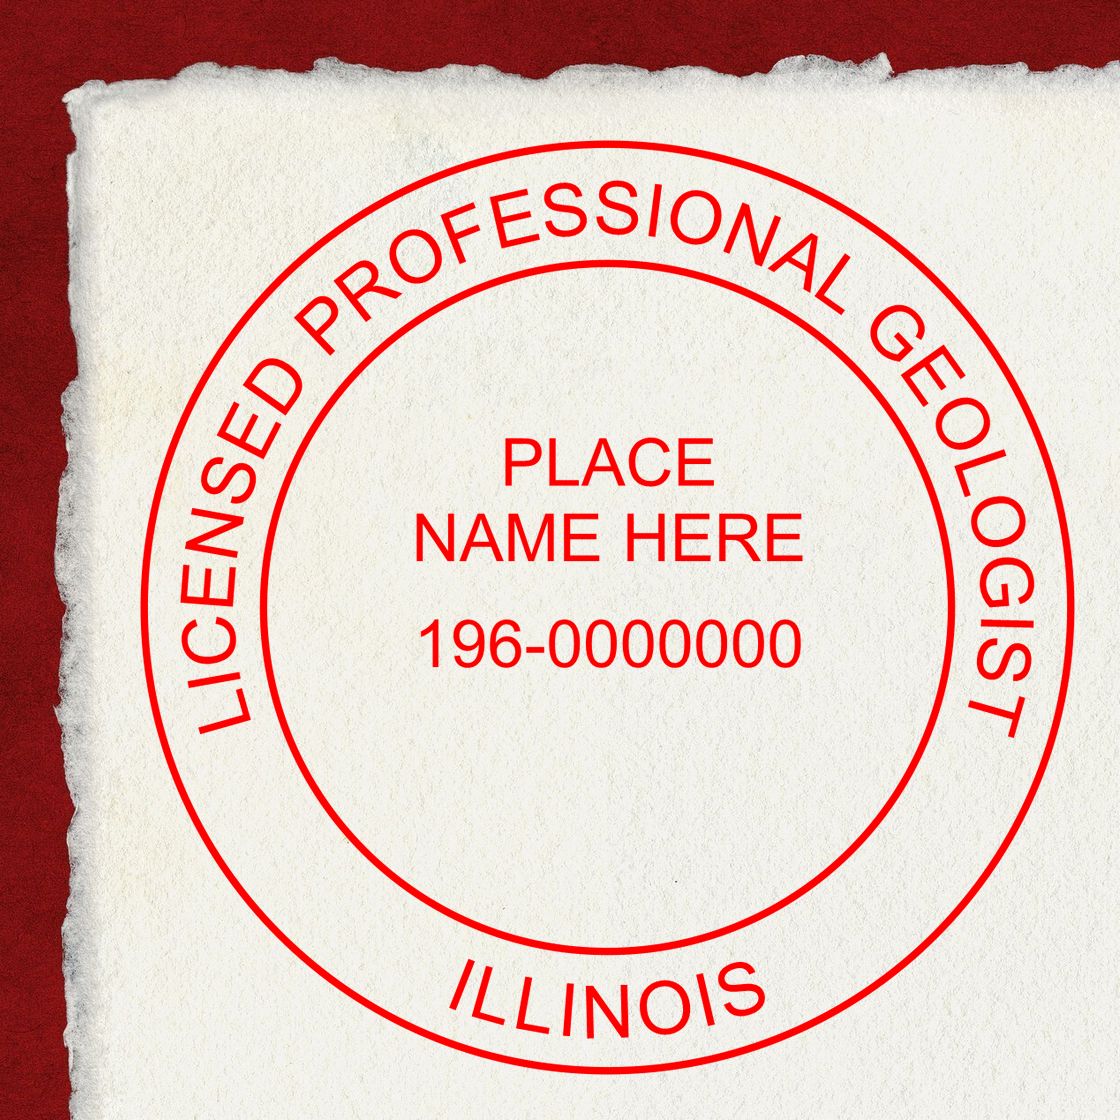 The Digital Illinois Geologist Stamp, Electronic Seal for Illinois Geologist stamp impression comes to life with a crisp, detailed image stamped on paper - showcasing true professional quality.